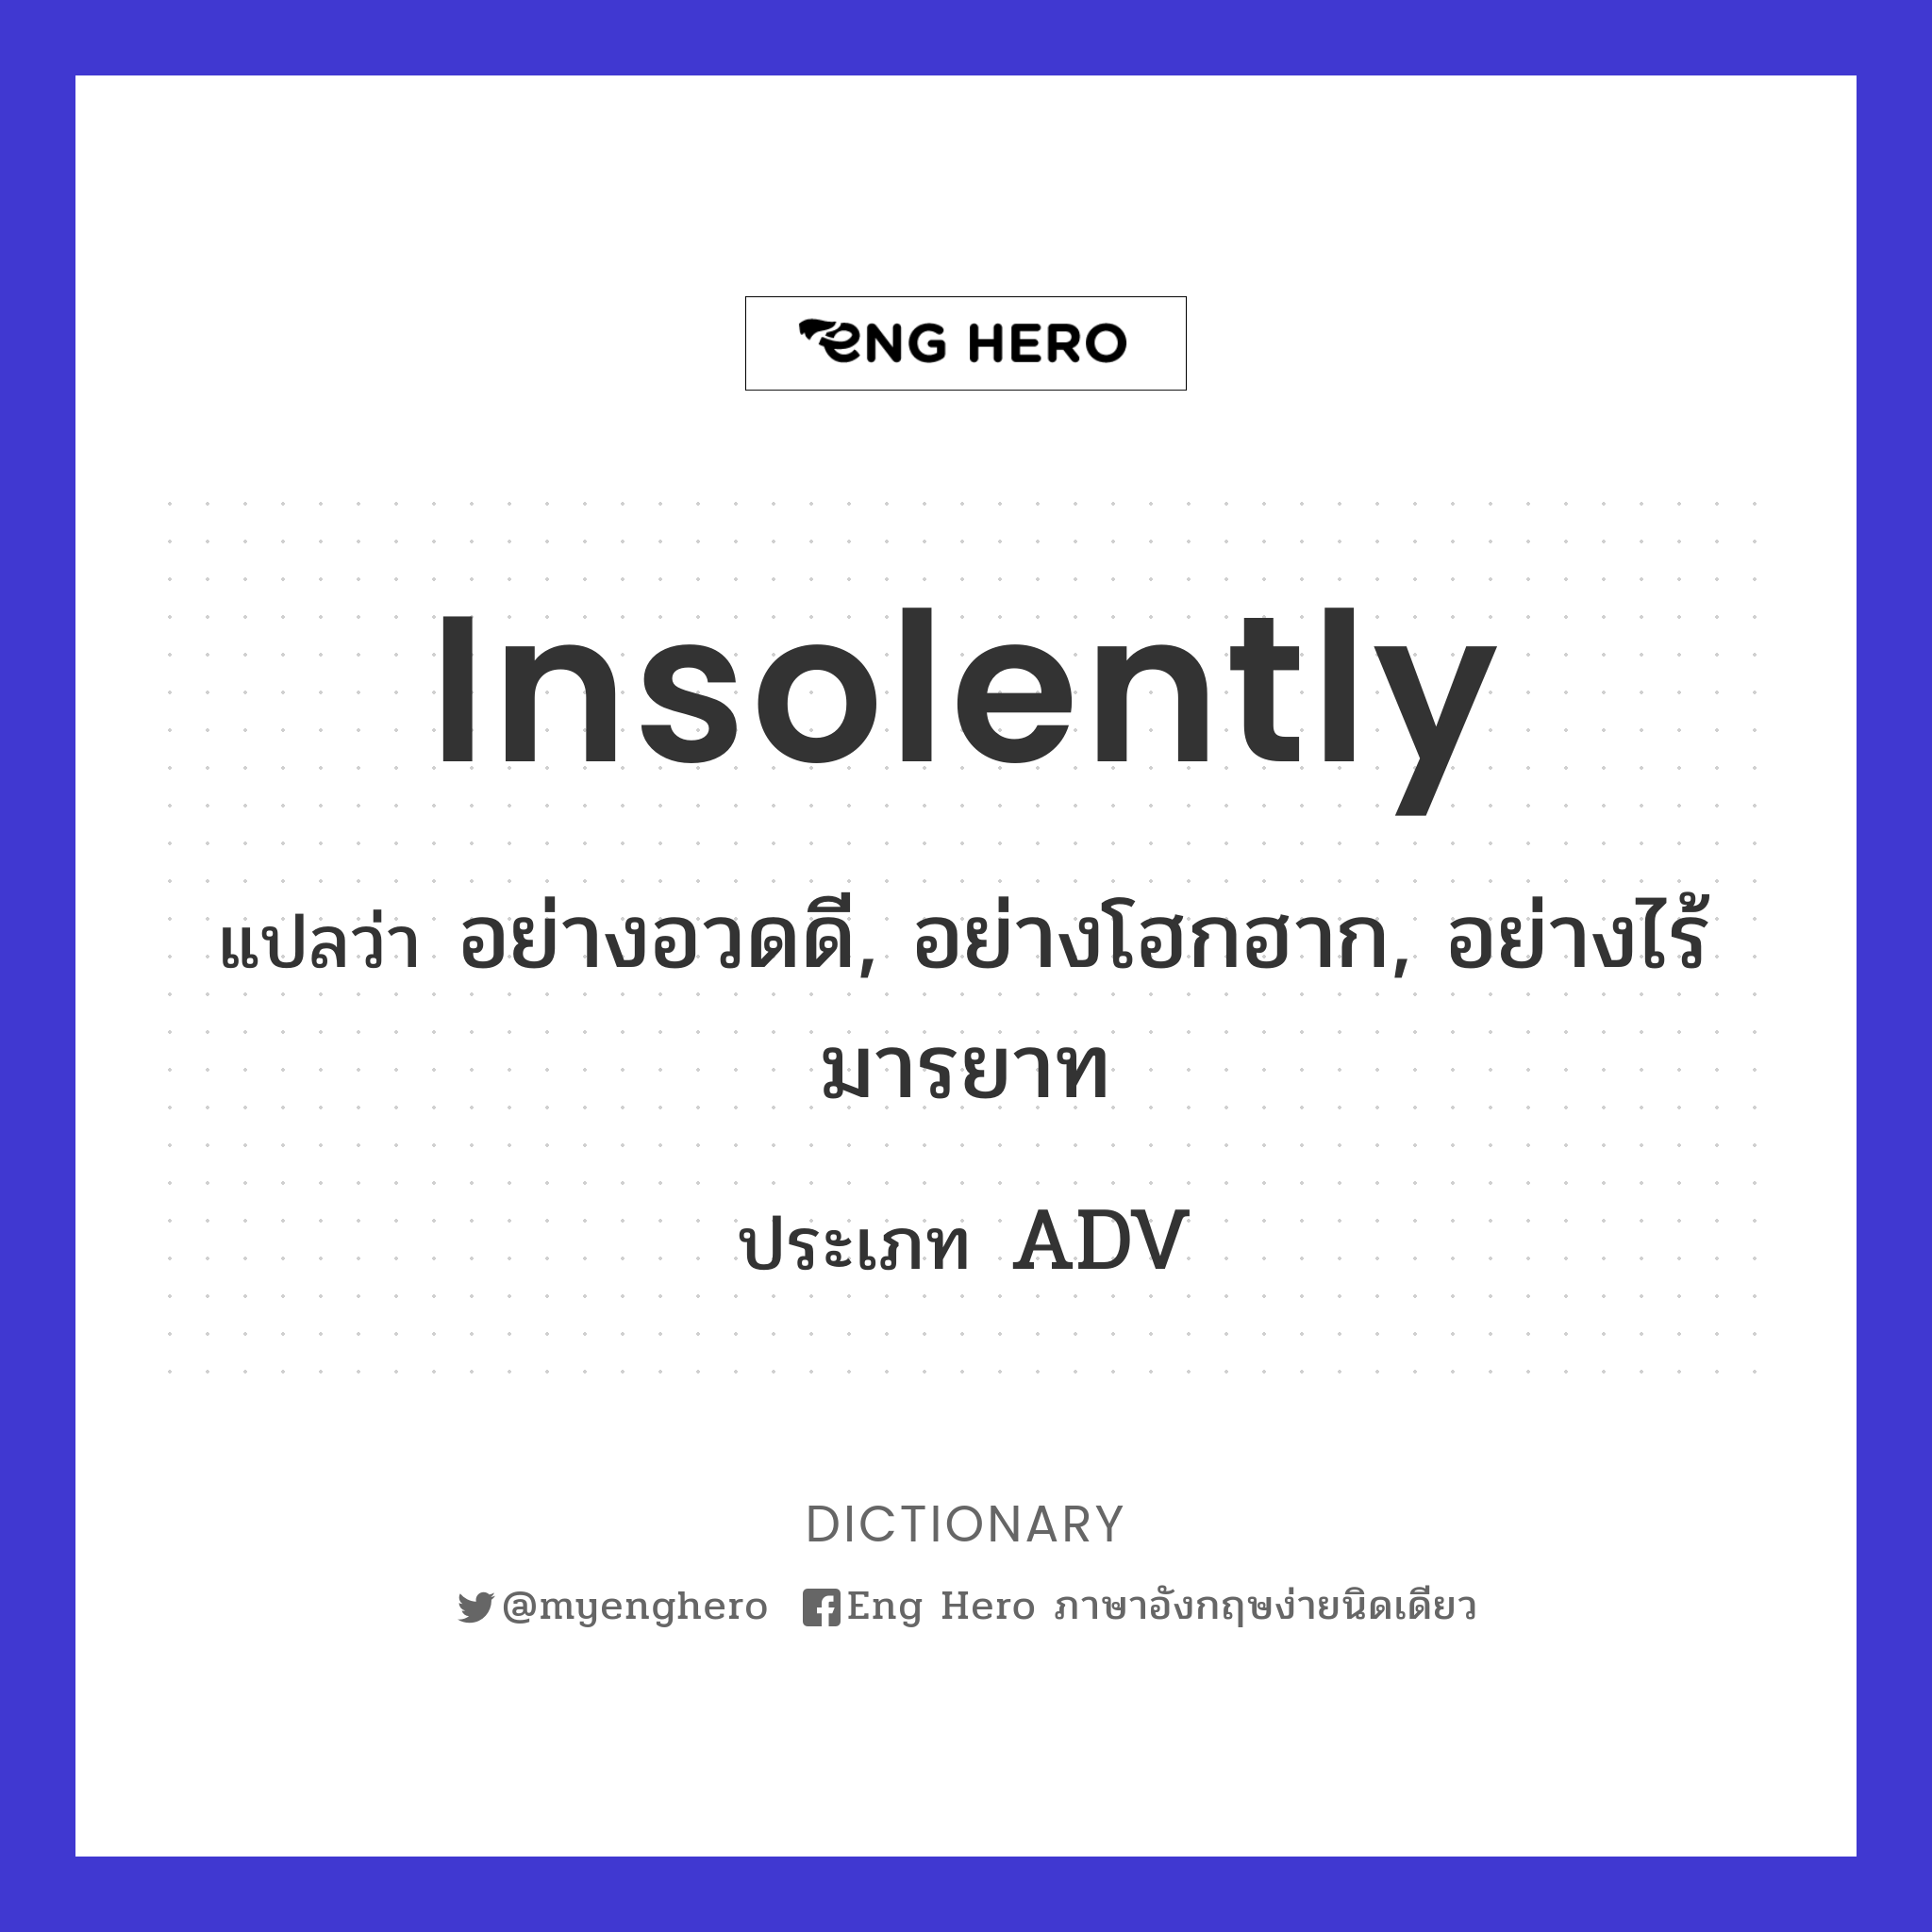 insolently